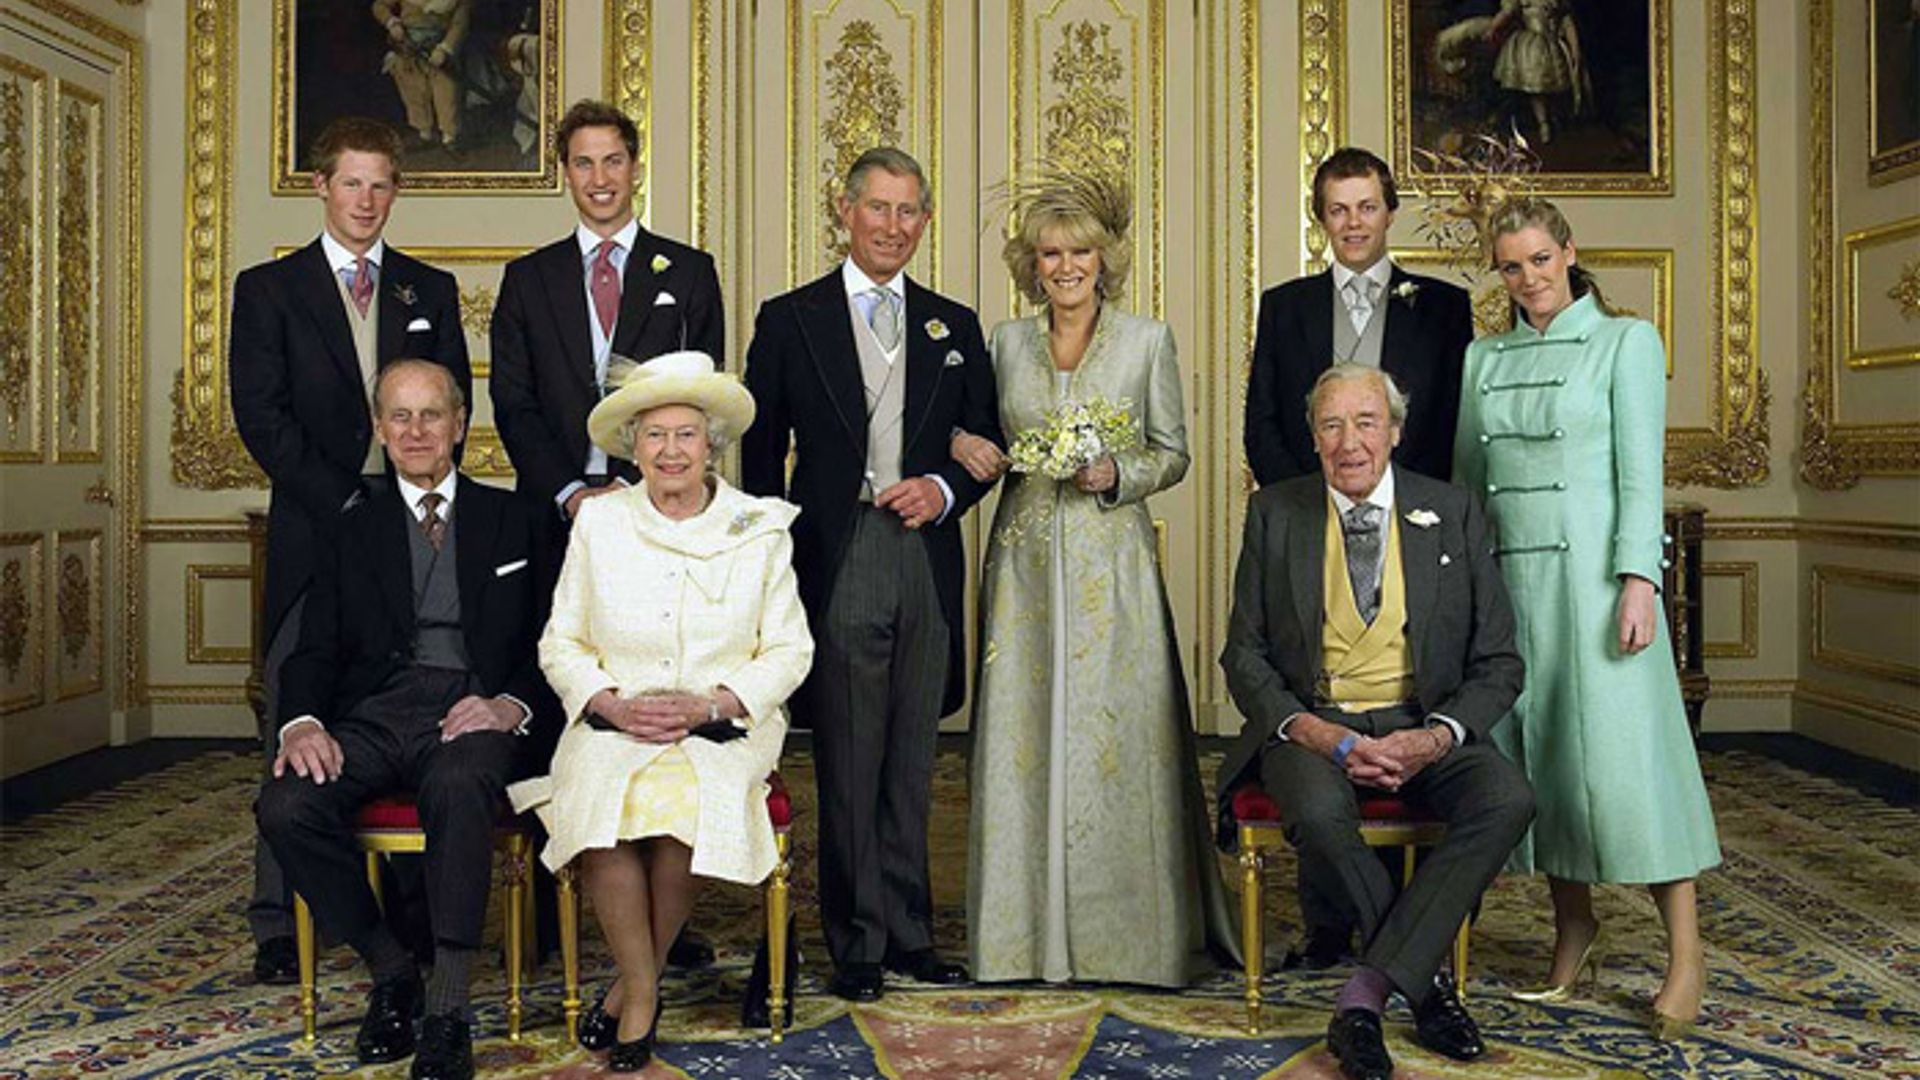 Charles and Camilla posing for wedding photos alongside their close family